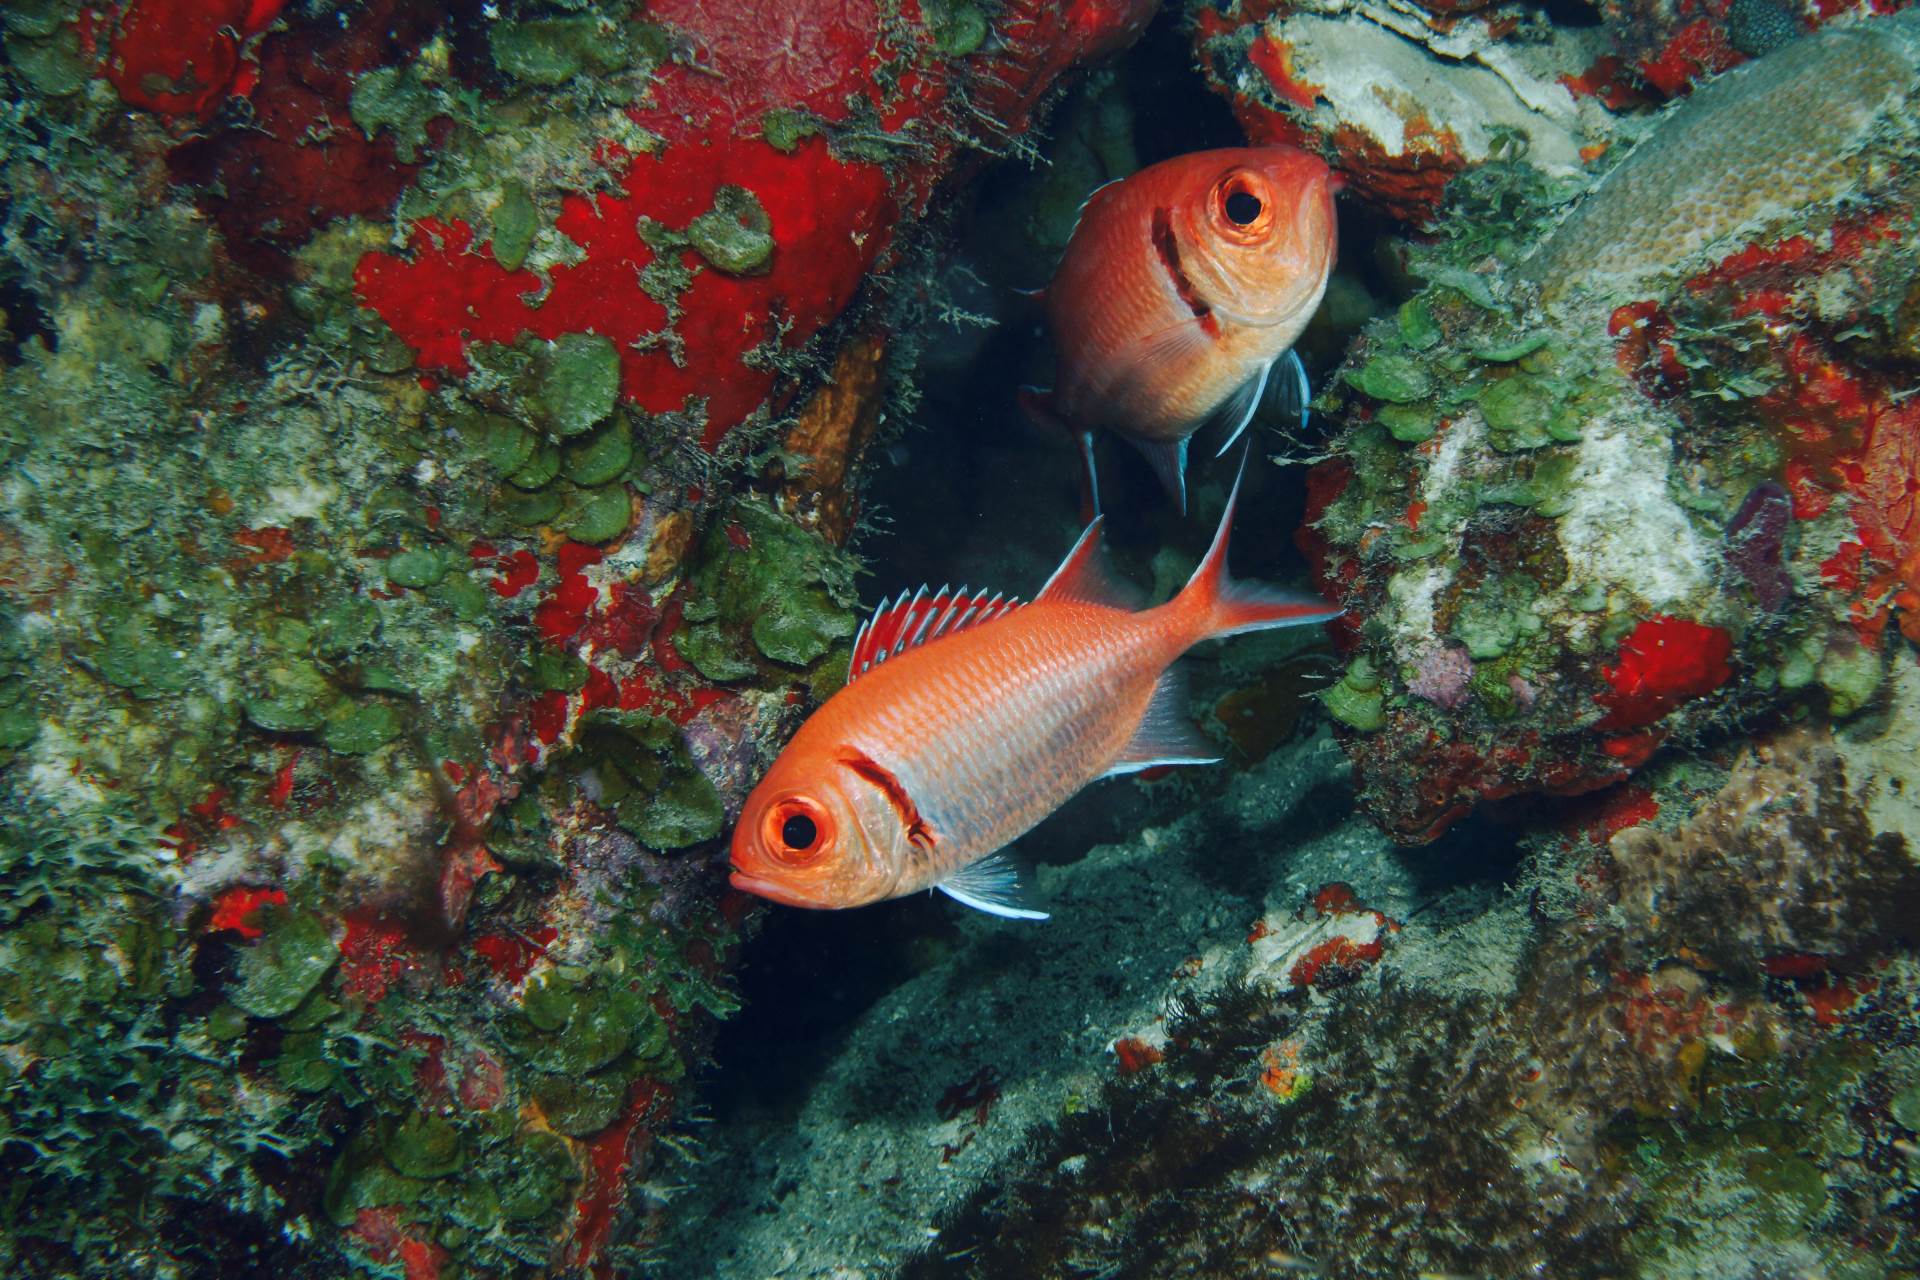 please feature this on your instagram (photo credit goes to @photographylife.4u)

two squirel fish in nevis